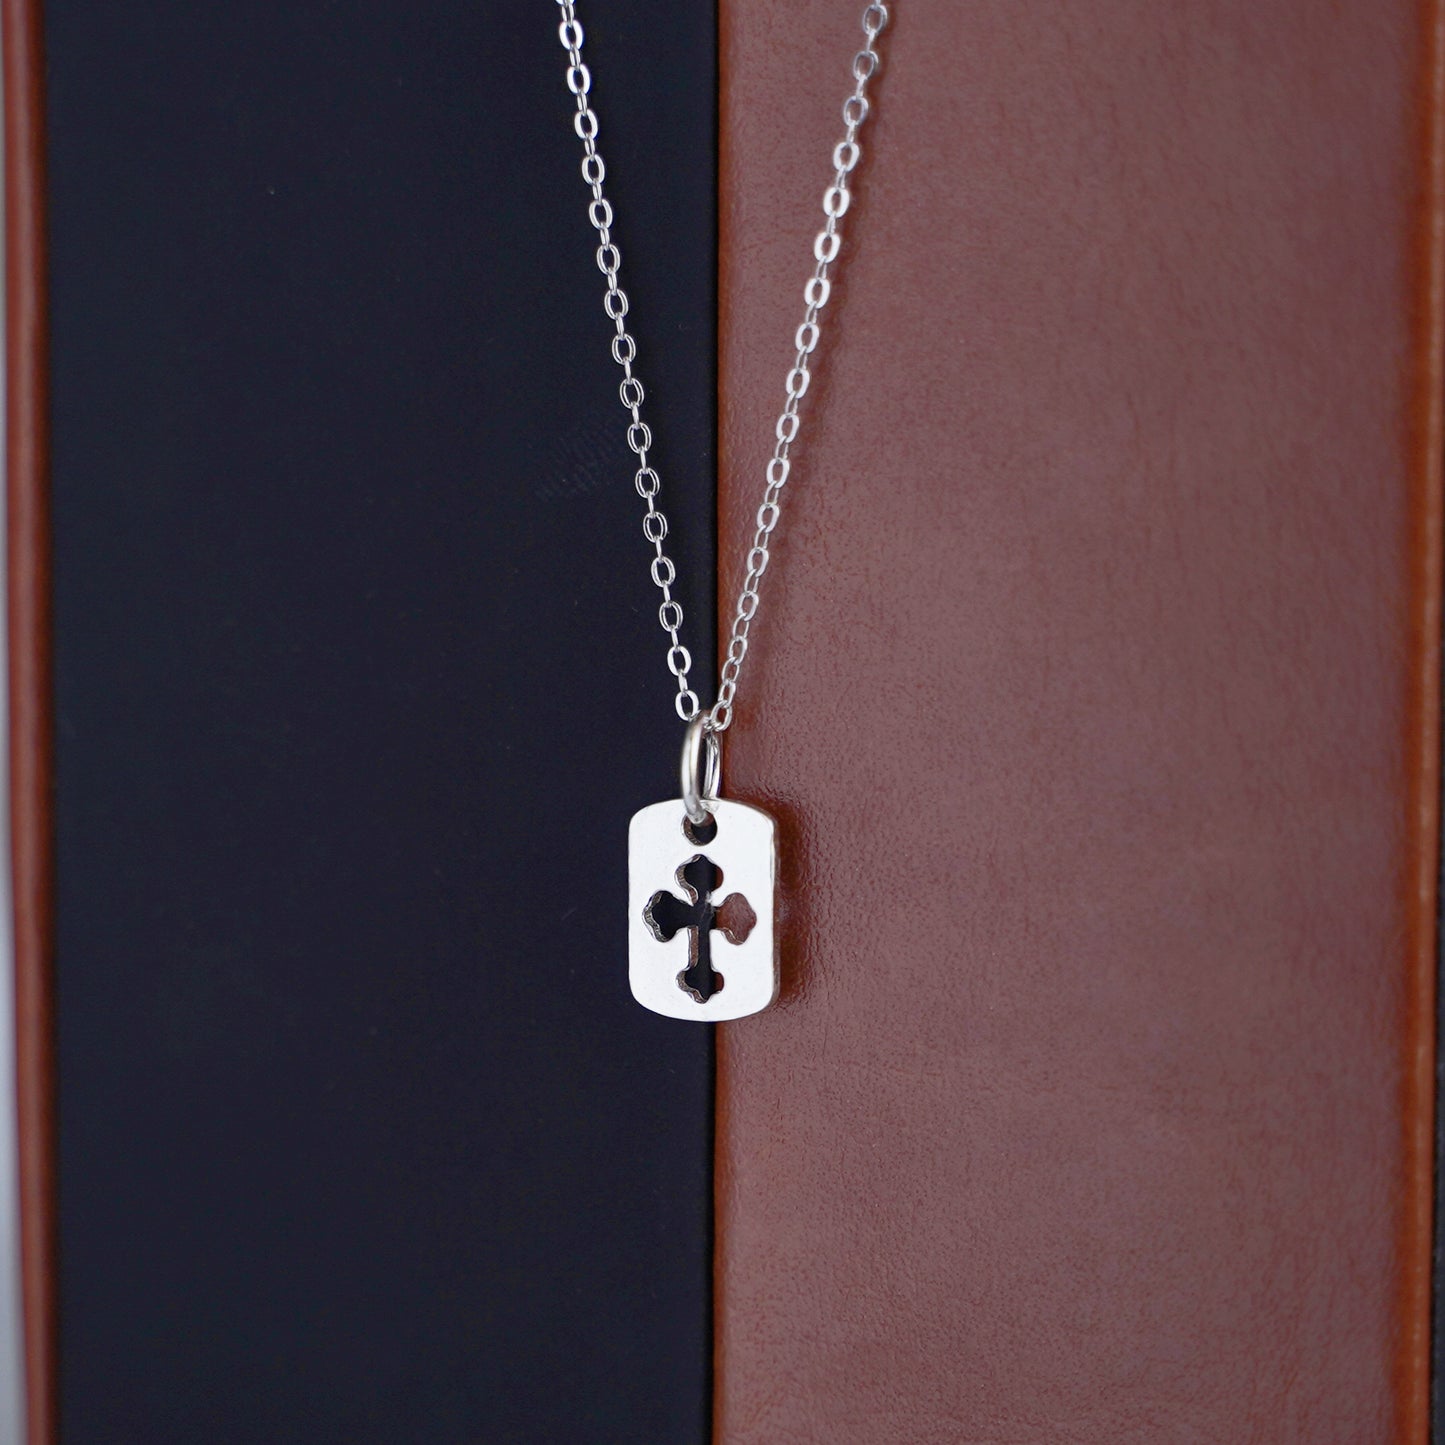 Sterling Silver Small Hollow Floral Cross Dog Tag Charm Pendant - sugarkittenlondon